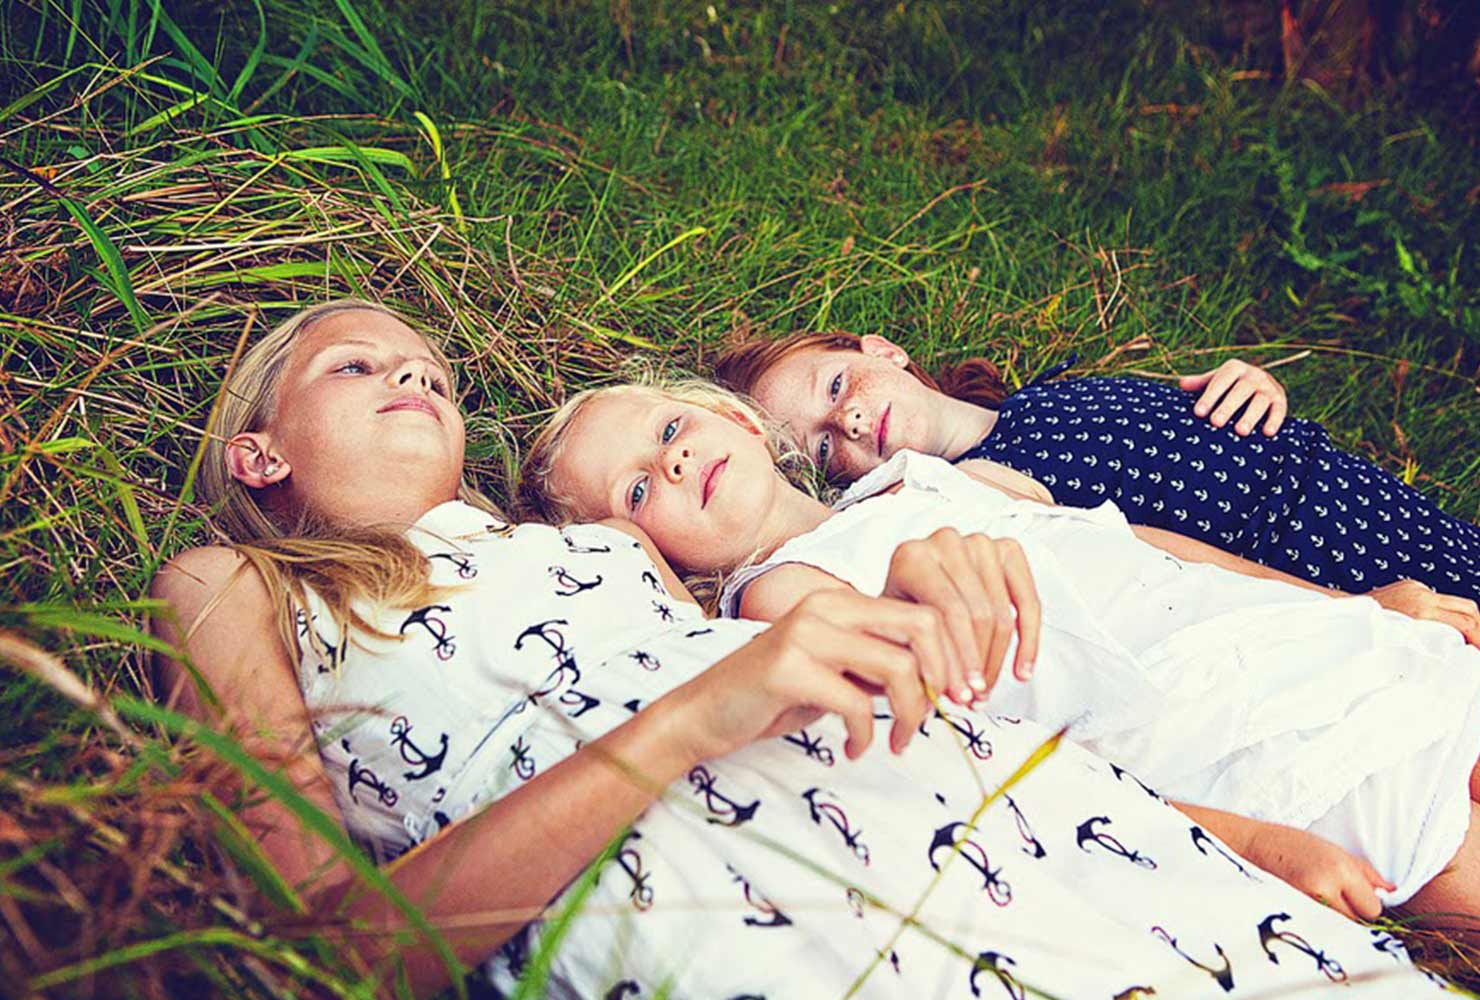 sibling photo ideas sisters in grass